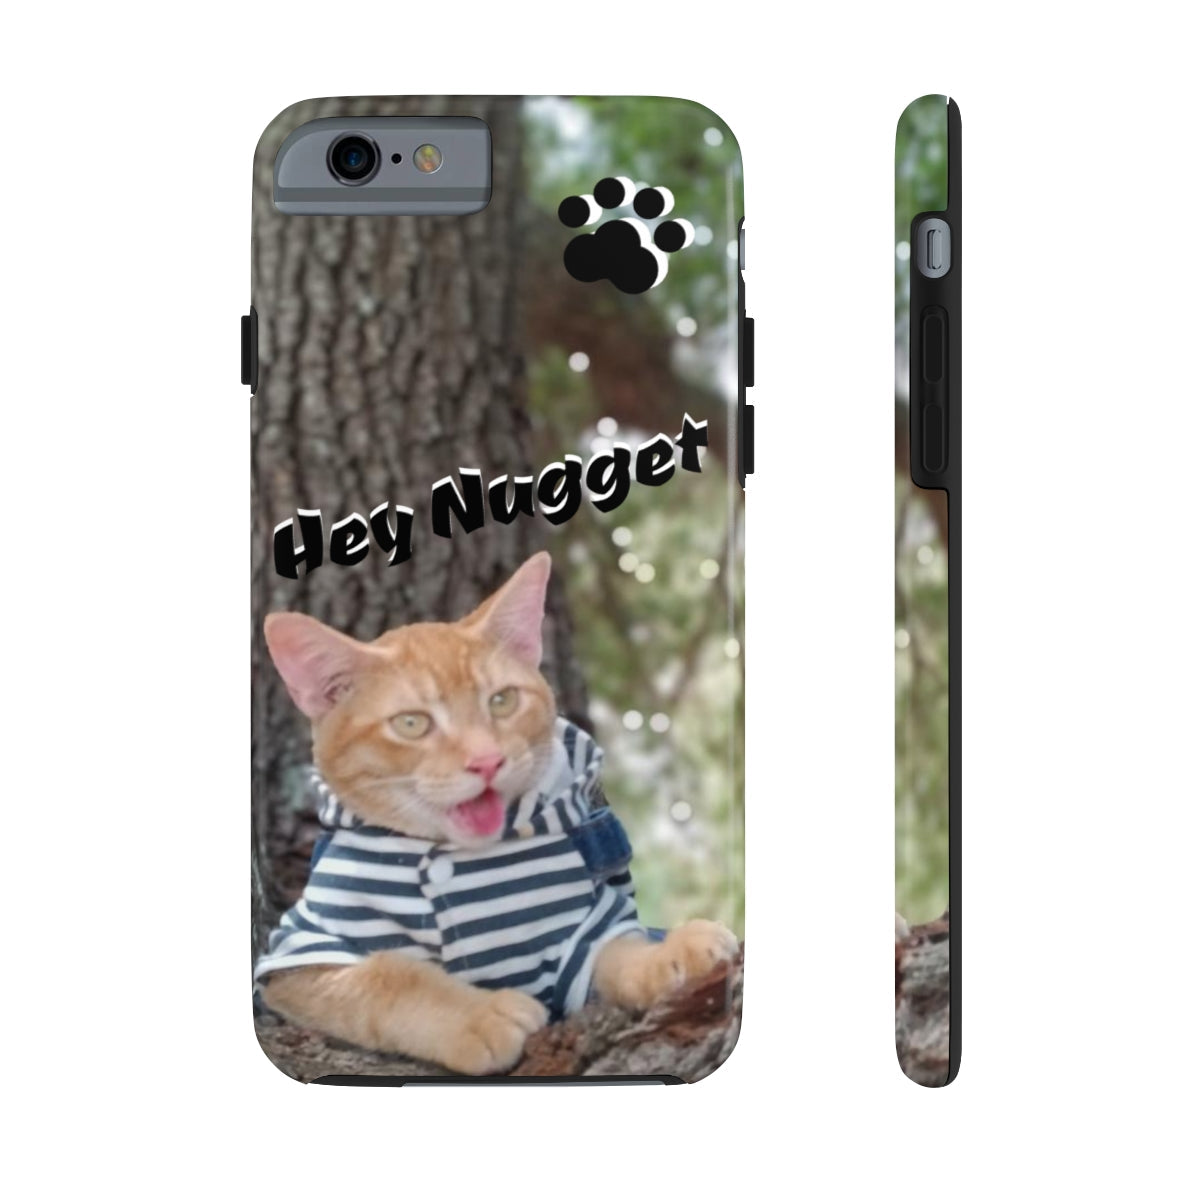 Stand out  with the  Tough Phone Cases, Case-Mate  available at Hey Nugget. Grab yours today!